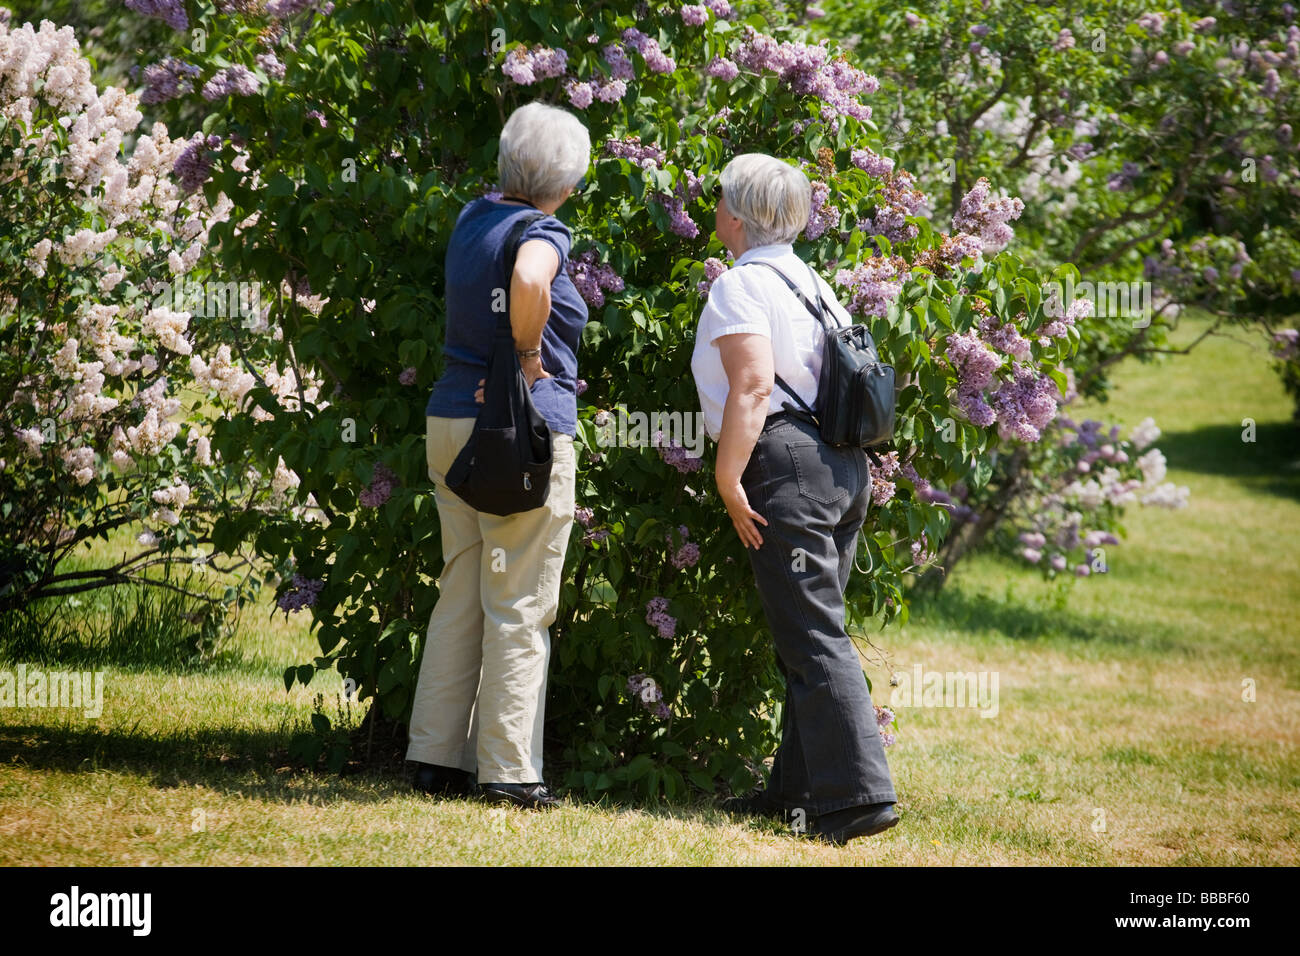 Women enjoying lilacs blooming Highland Park designed by Frederick Law Olmsted Rochester New York Monroe County Stock Photo